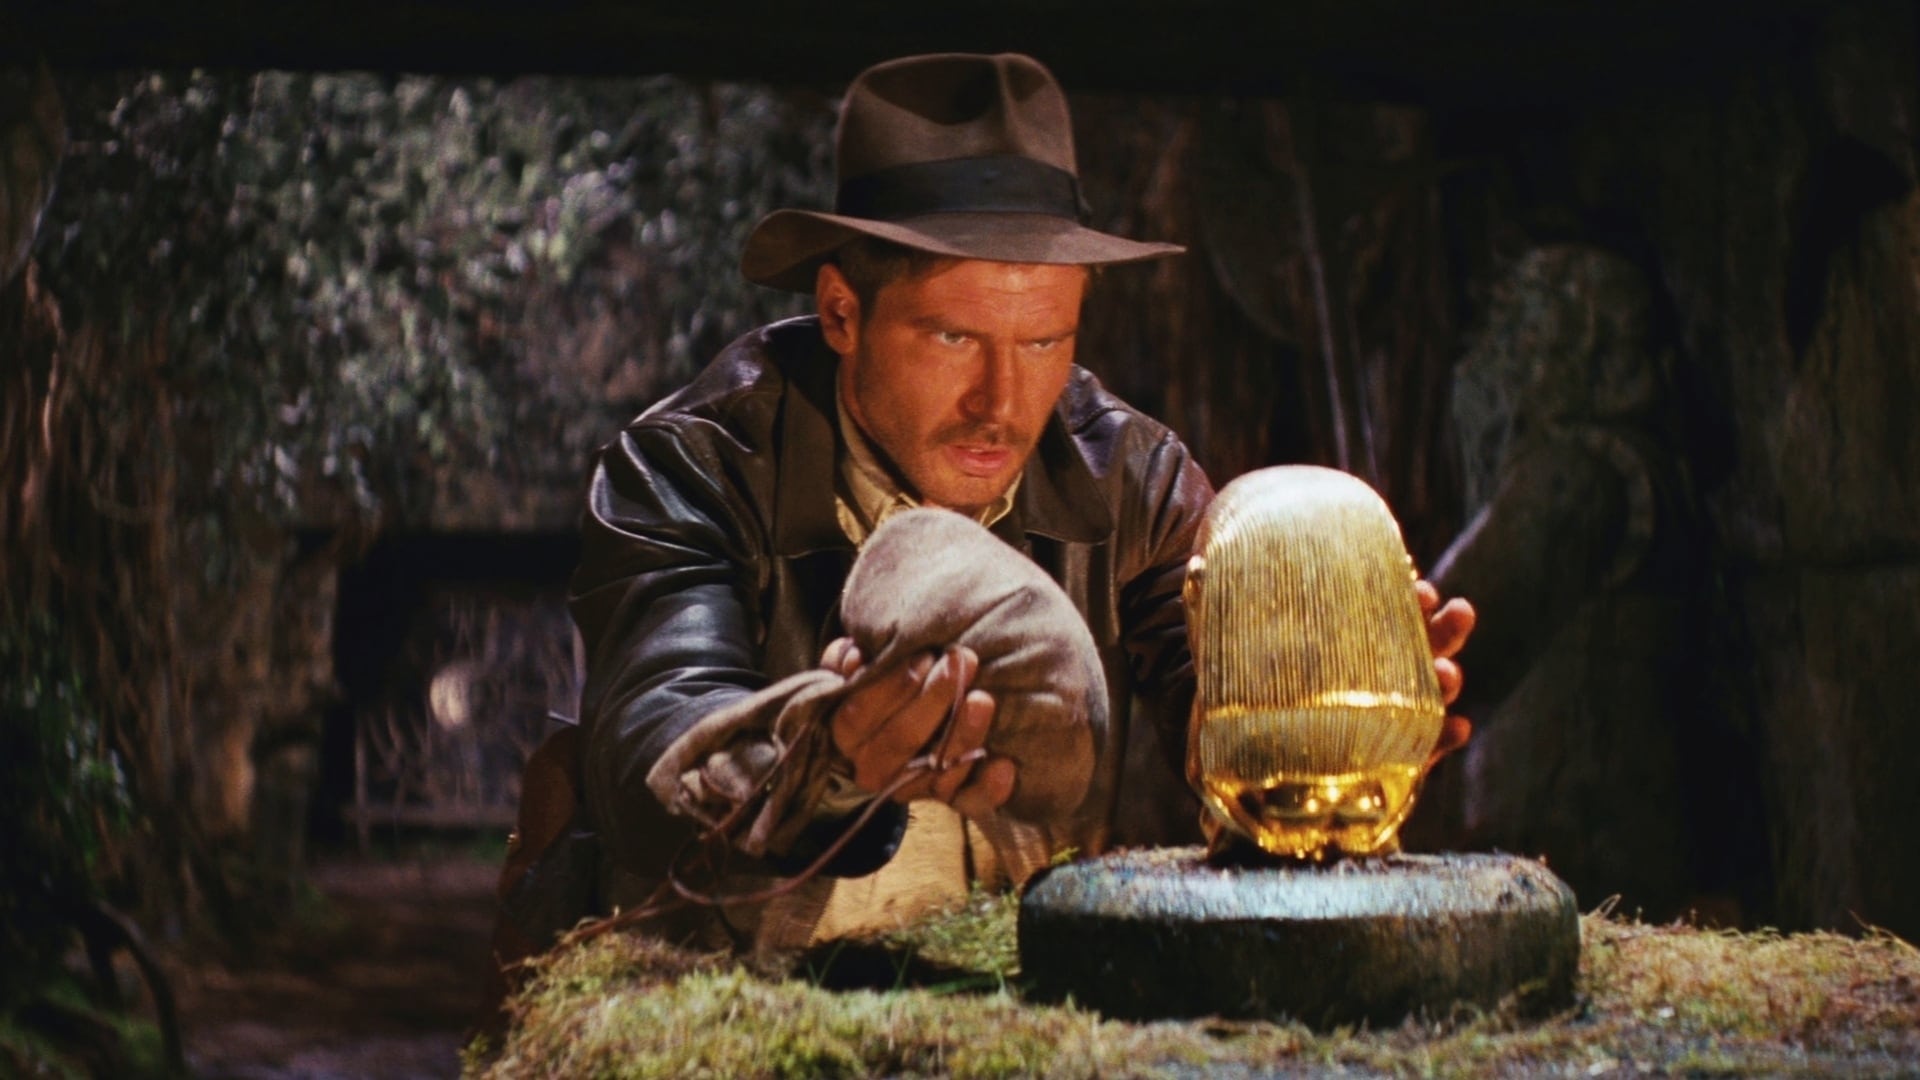 Image from the movie 